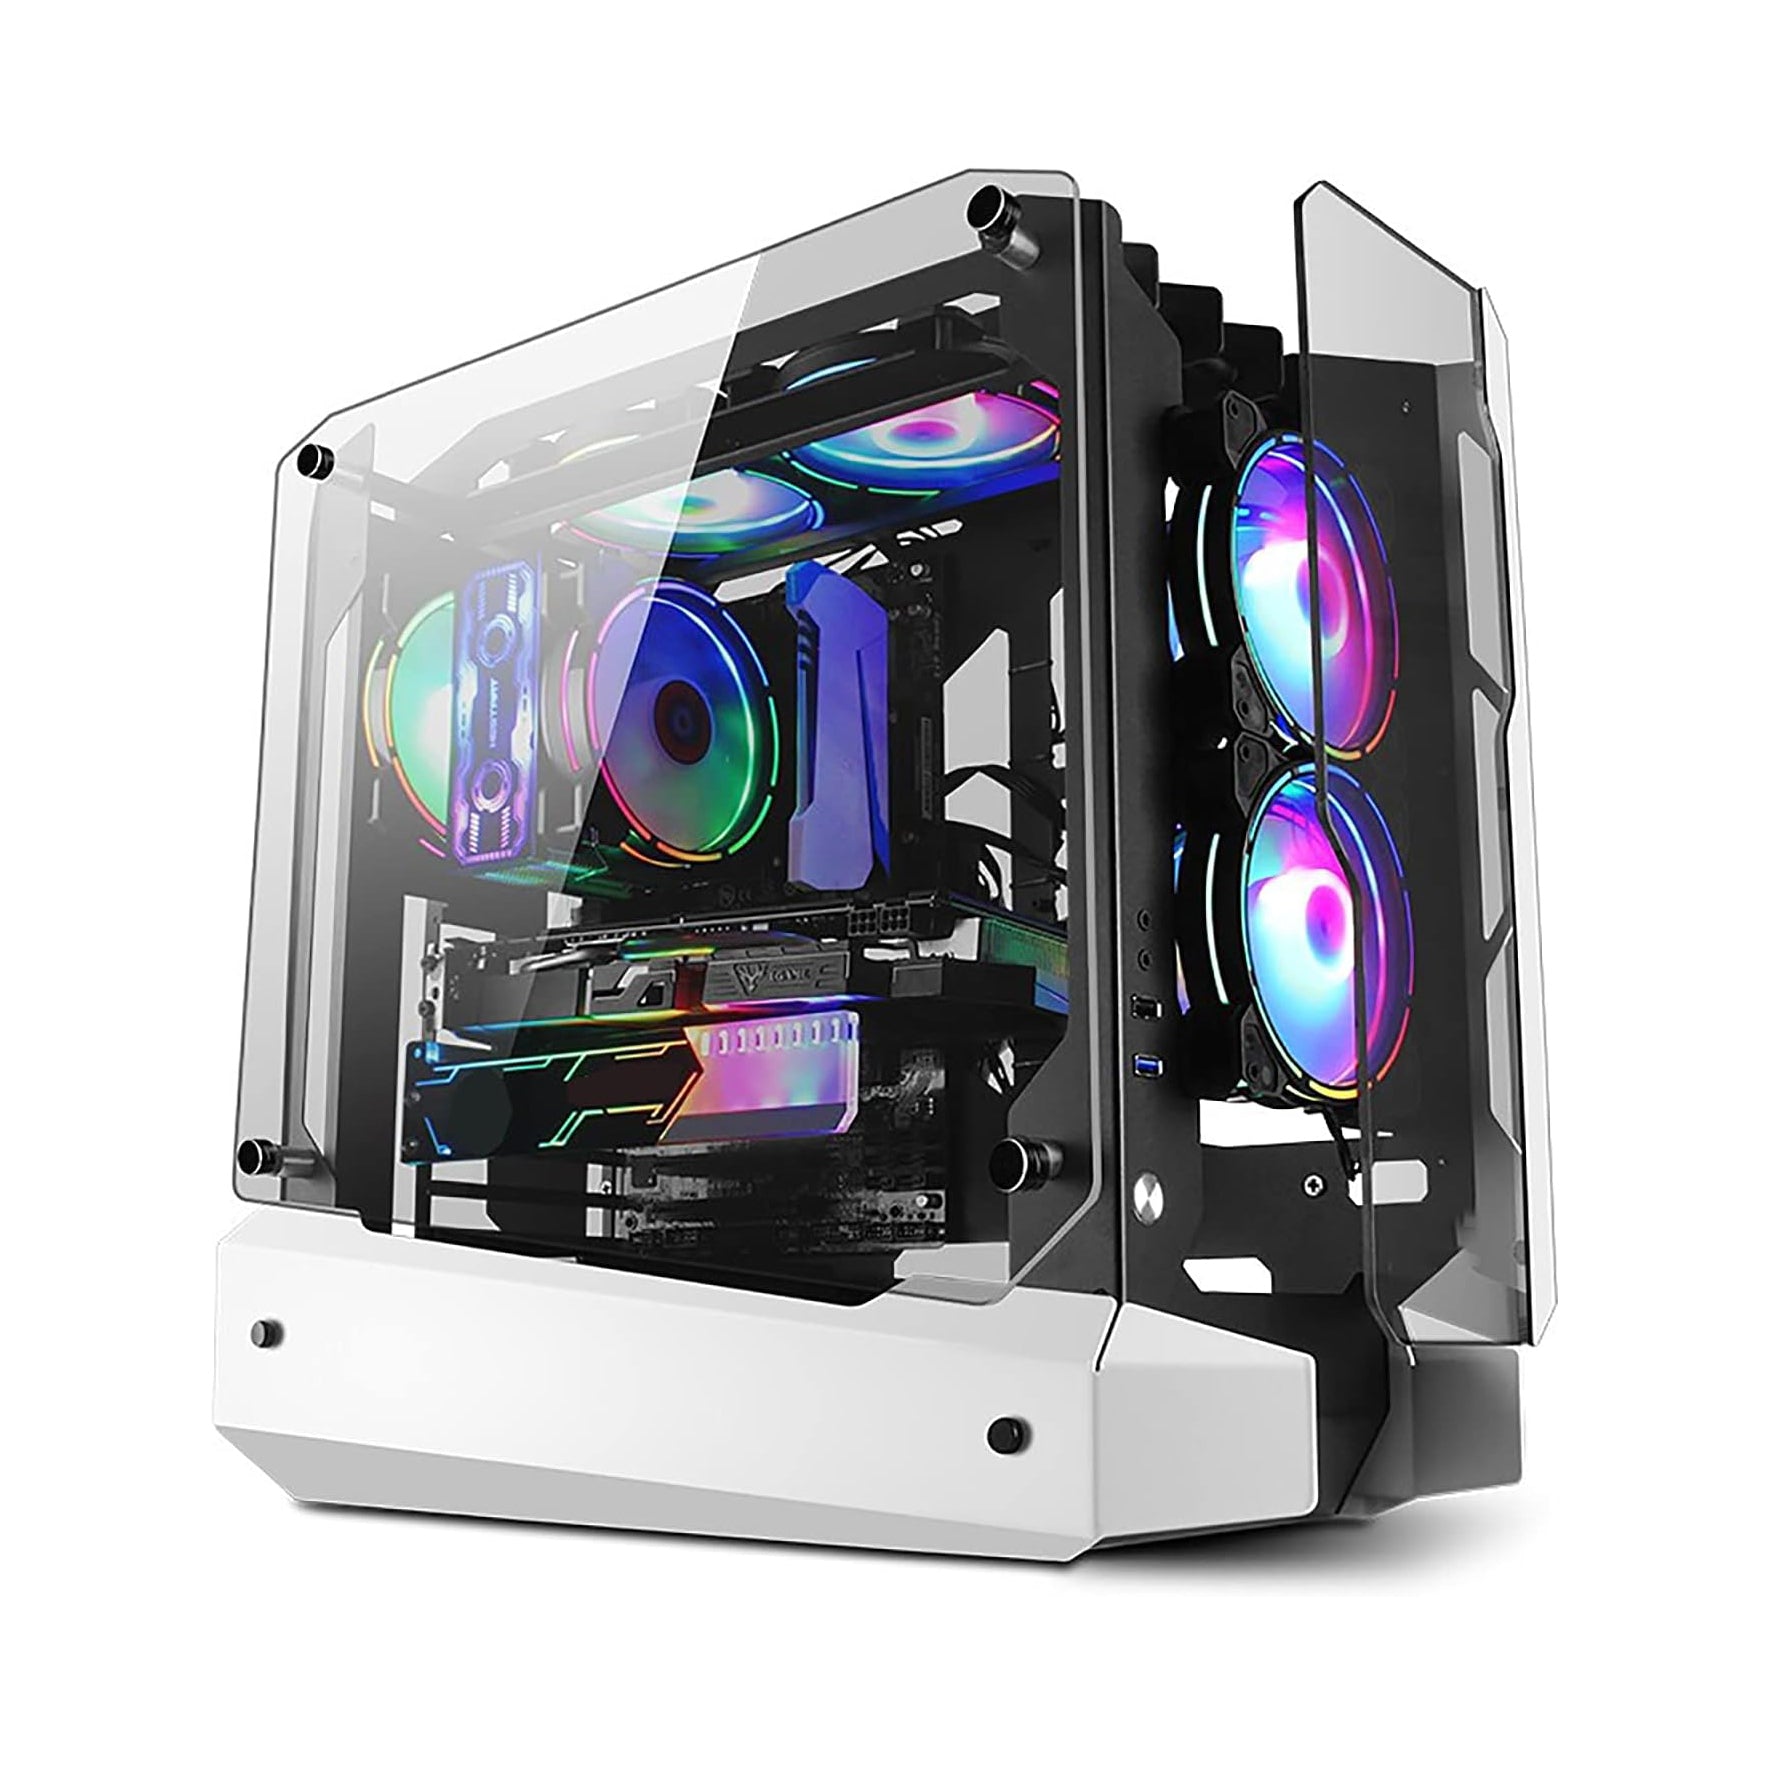 Ark ATX Mid-Tower PC Gaming Case, Non-Closed Case Tempered Glass Panel, 8 x Case Fans Installation Position - Front IO USB 3.0 Port, White - Not Include Fans